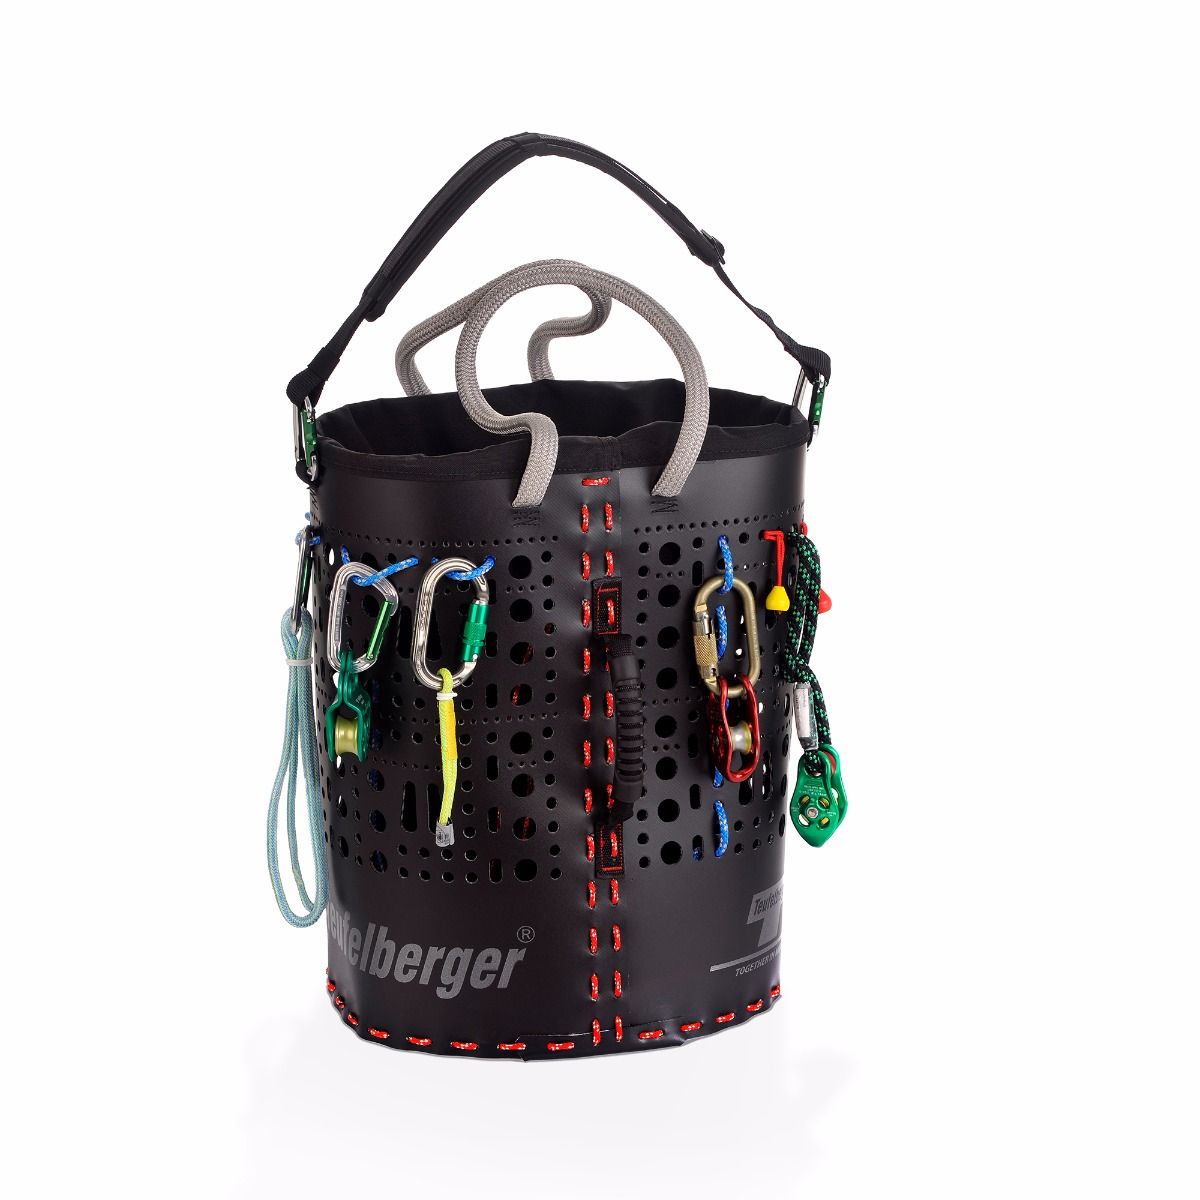 Rope Bags for Hauling, Rescuing, and Rigging